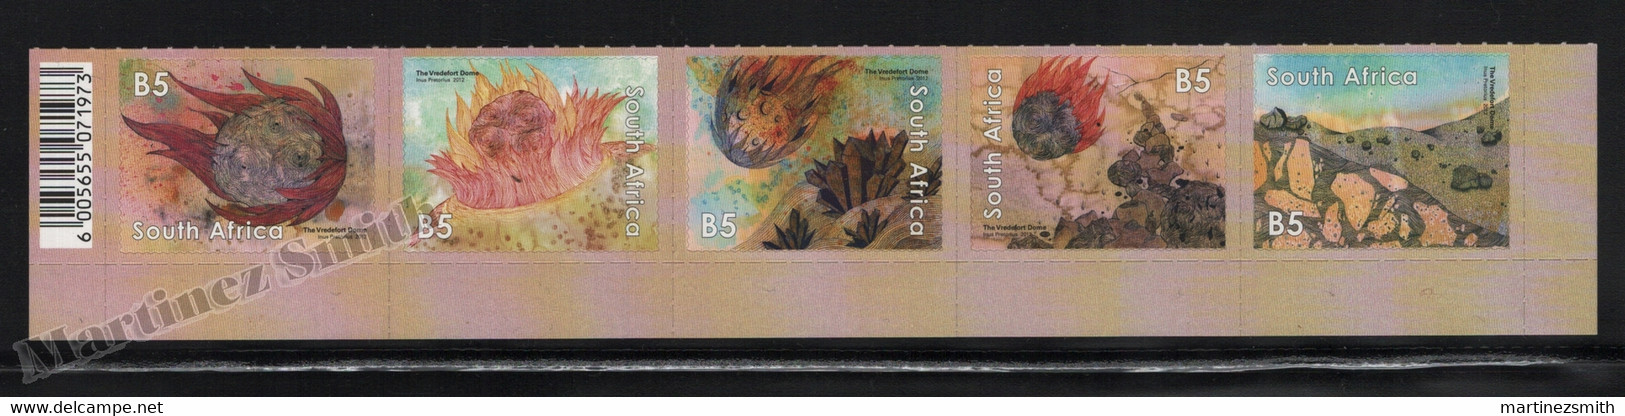 Afrique Du Sud - South Africa 2012 Yvert 1690-94, The Vredefort Dome - Adhesive Full Strip - MNH - Nuovi